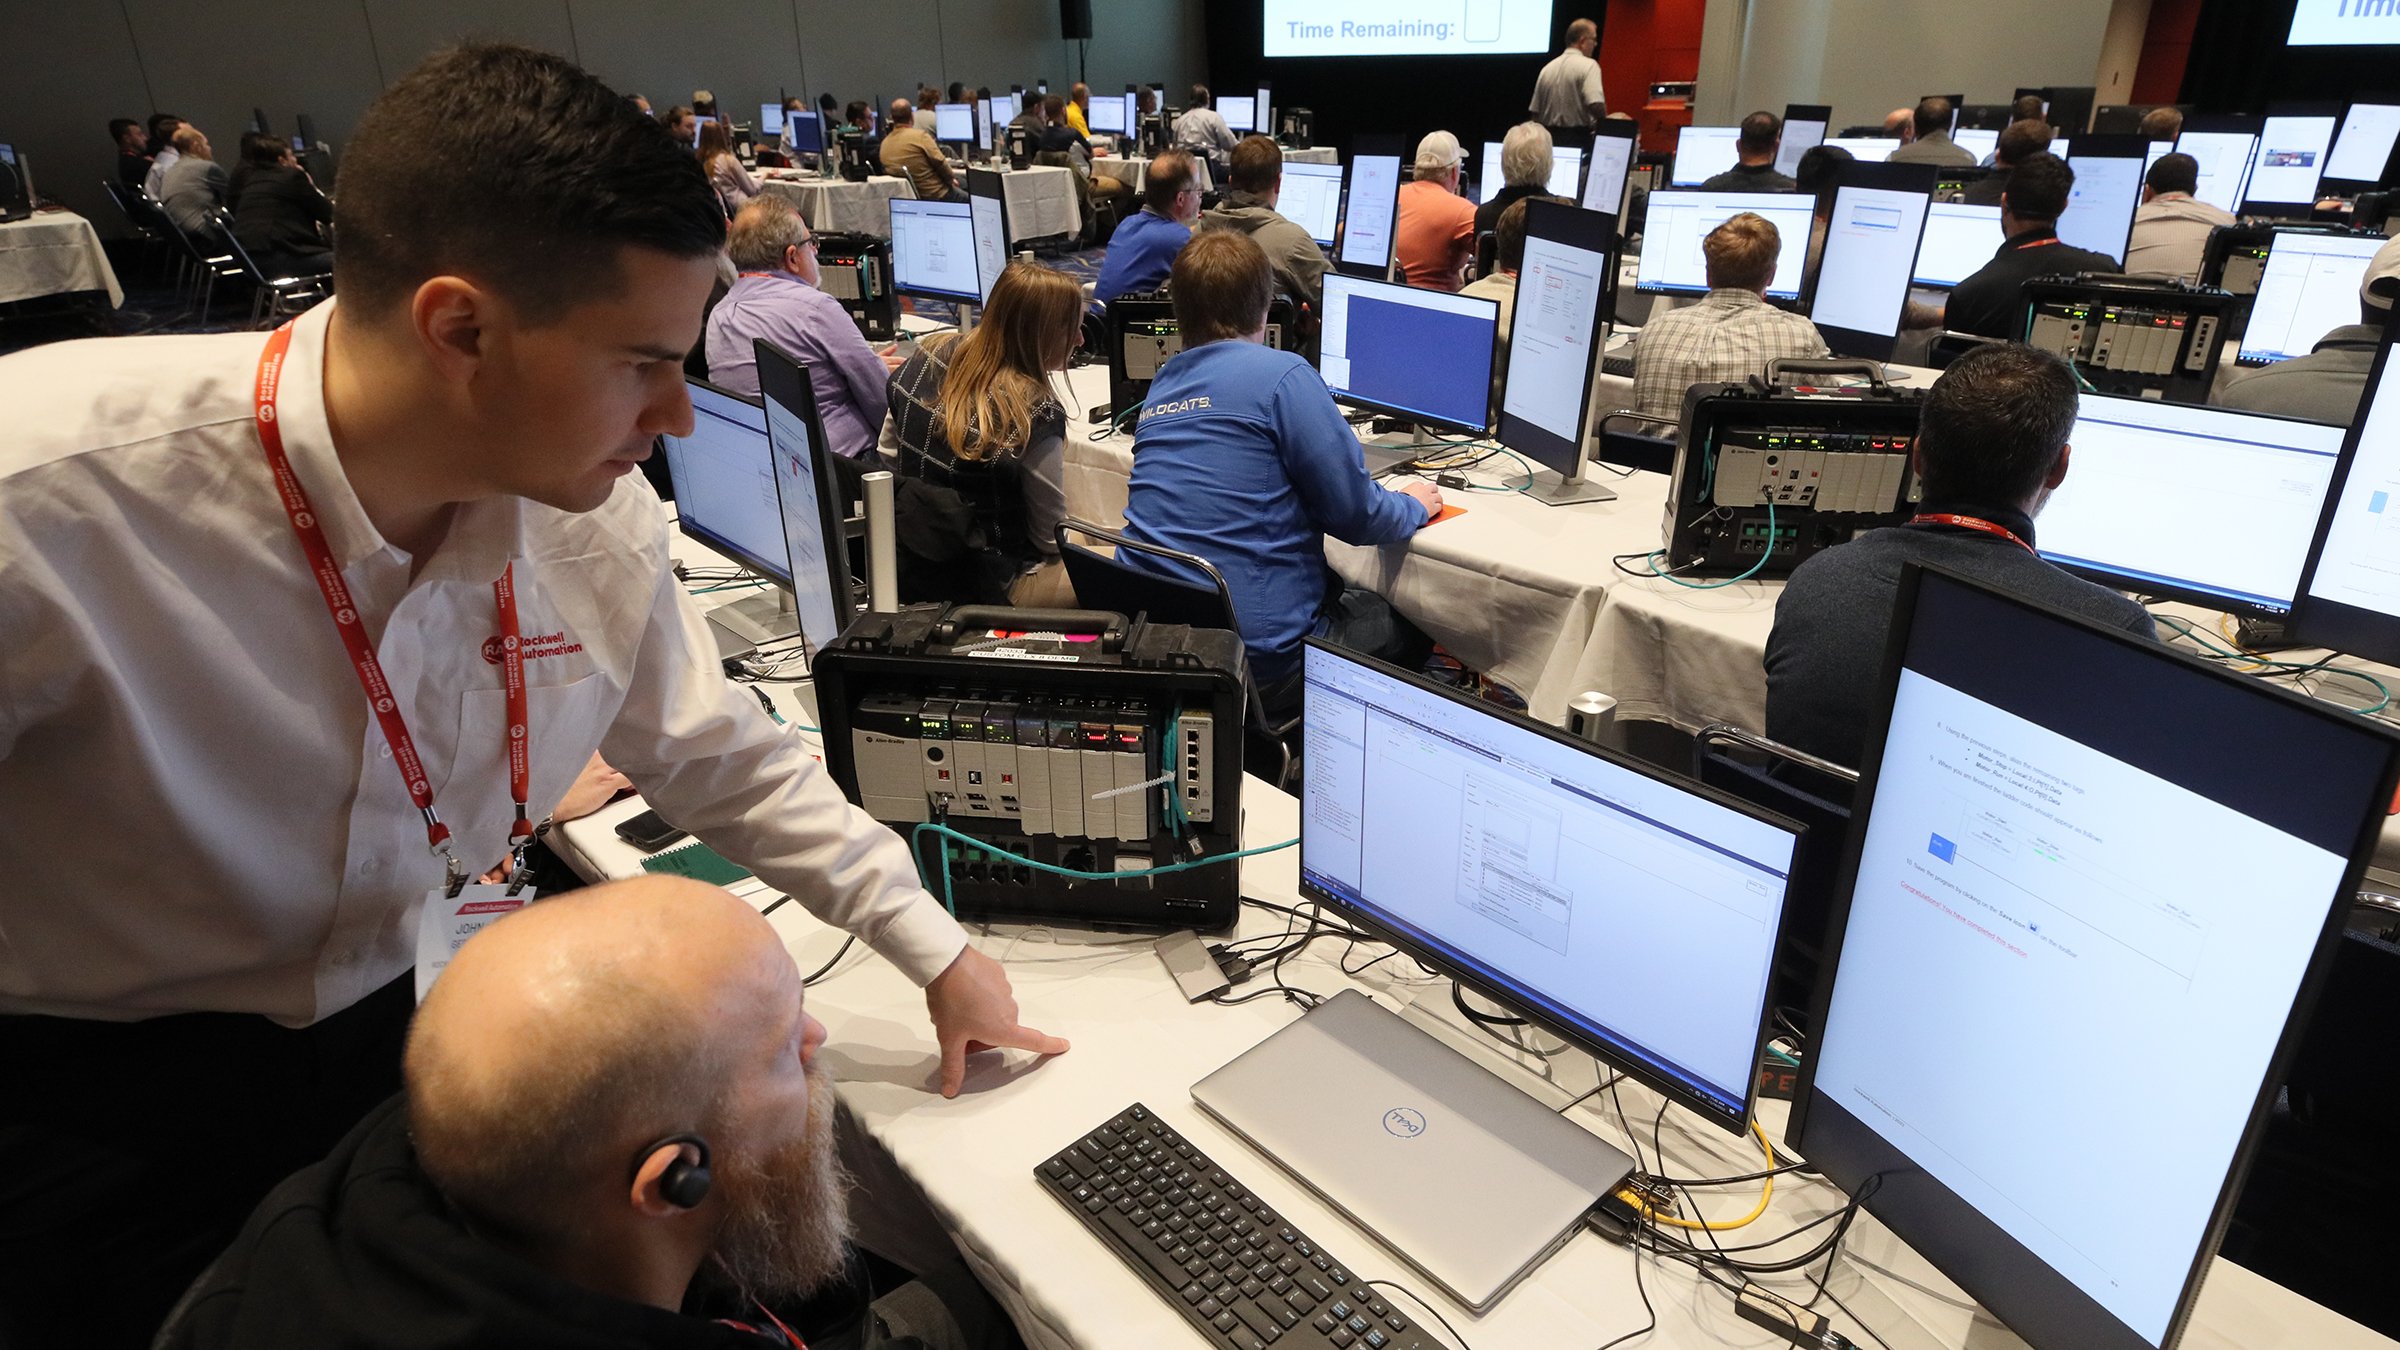 Rockwell Automation instructor works with attendee in large session room with many workstations and people.